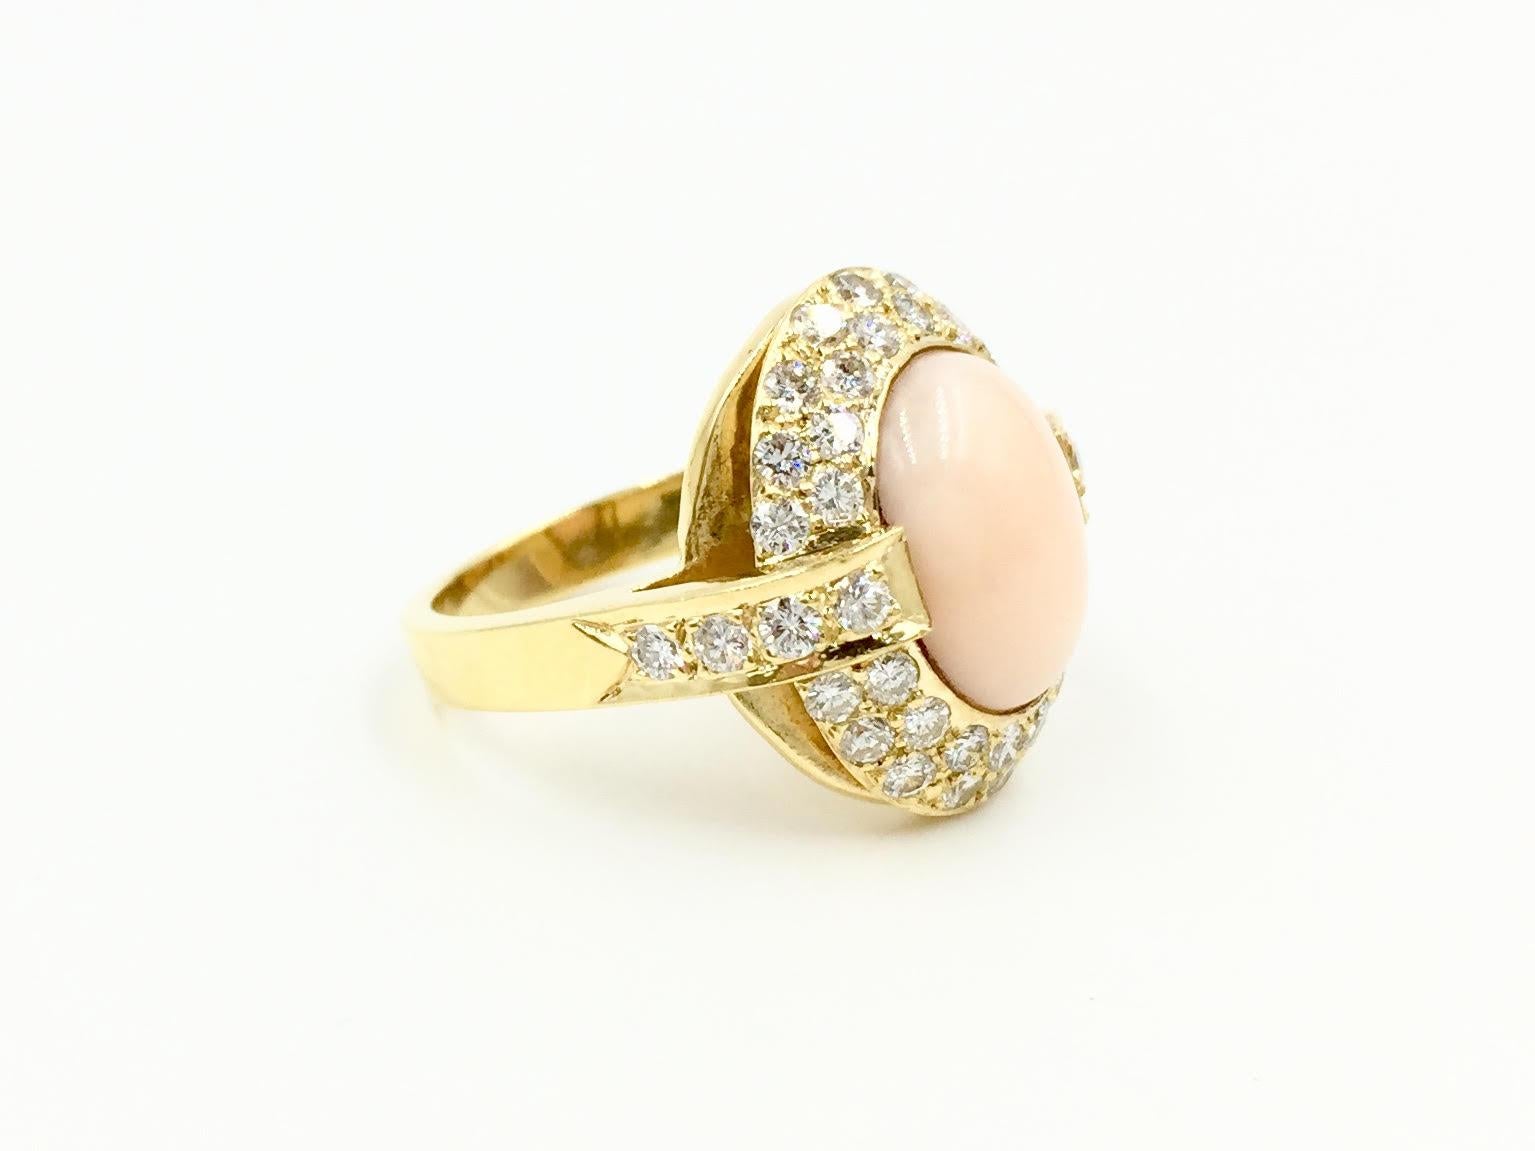 An incredible find, this Cindy Royce ring features genuine light pink coral beautifully surrounded by two rows of pavé set bright, clean round brilliant diamonds with a diamond carat total weight of 1.10 carats. With a nice low profile, this ring is